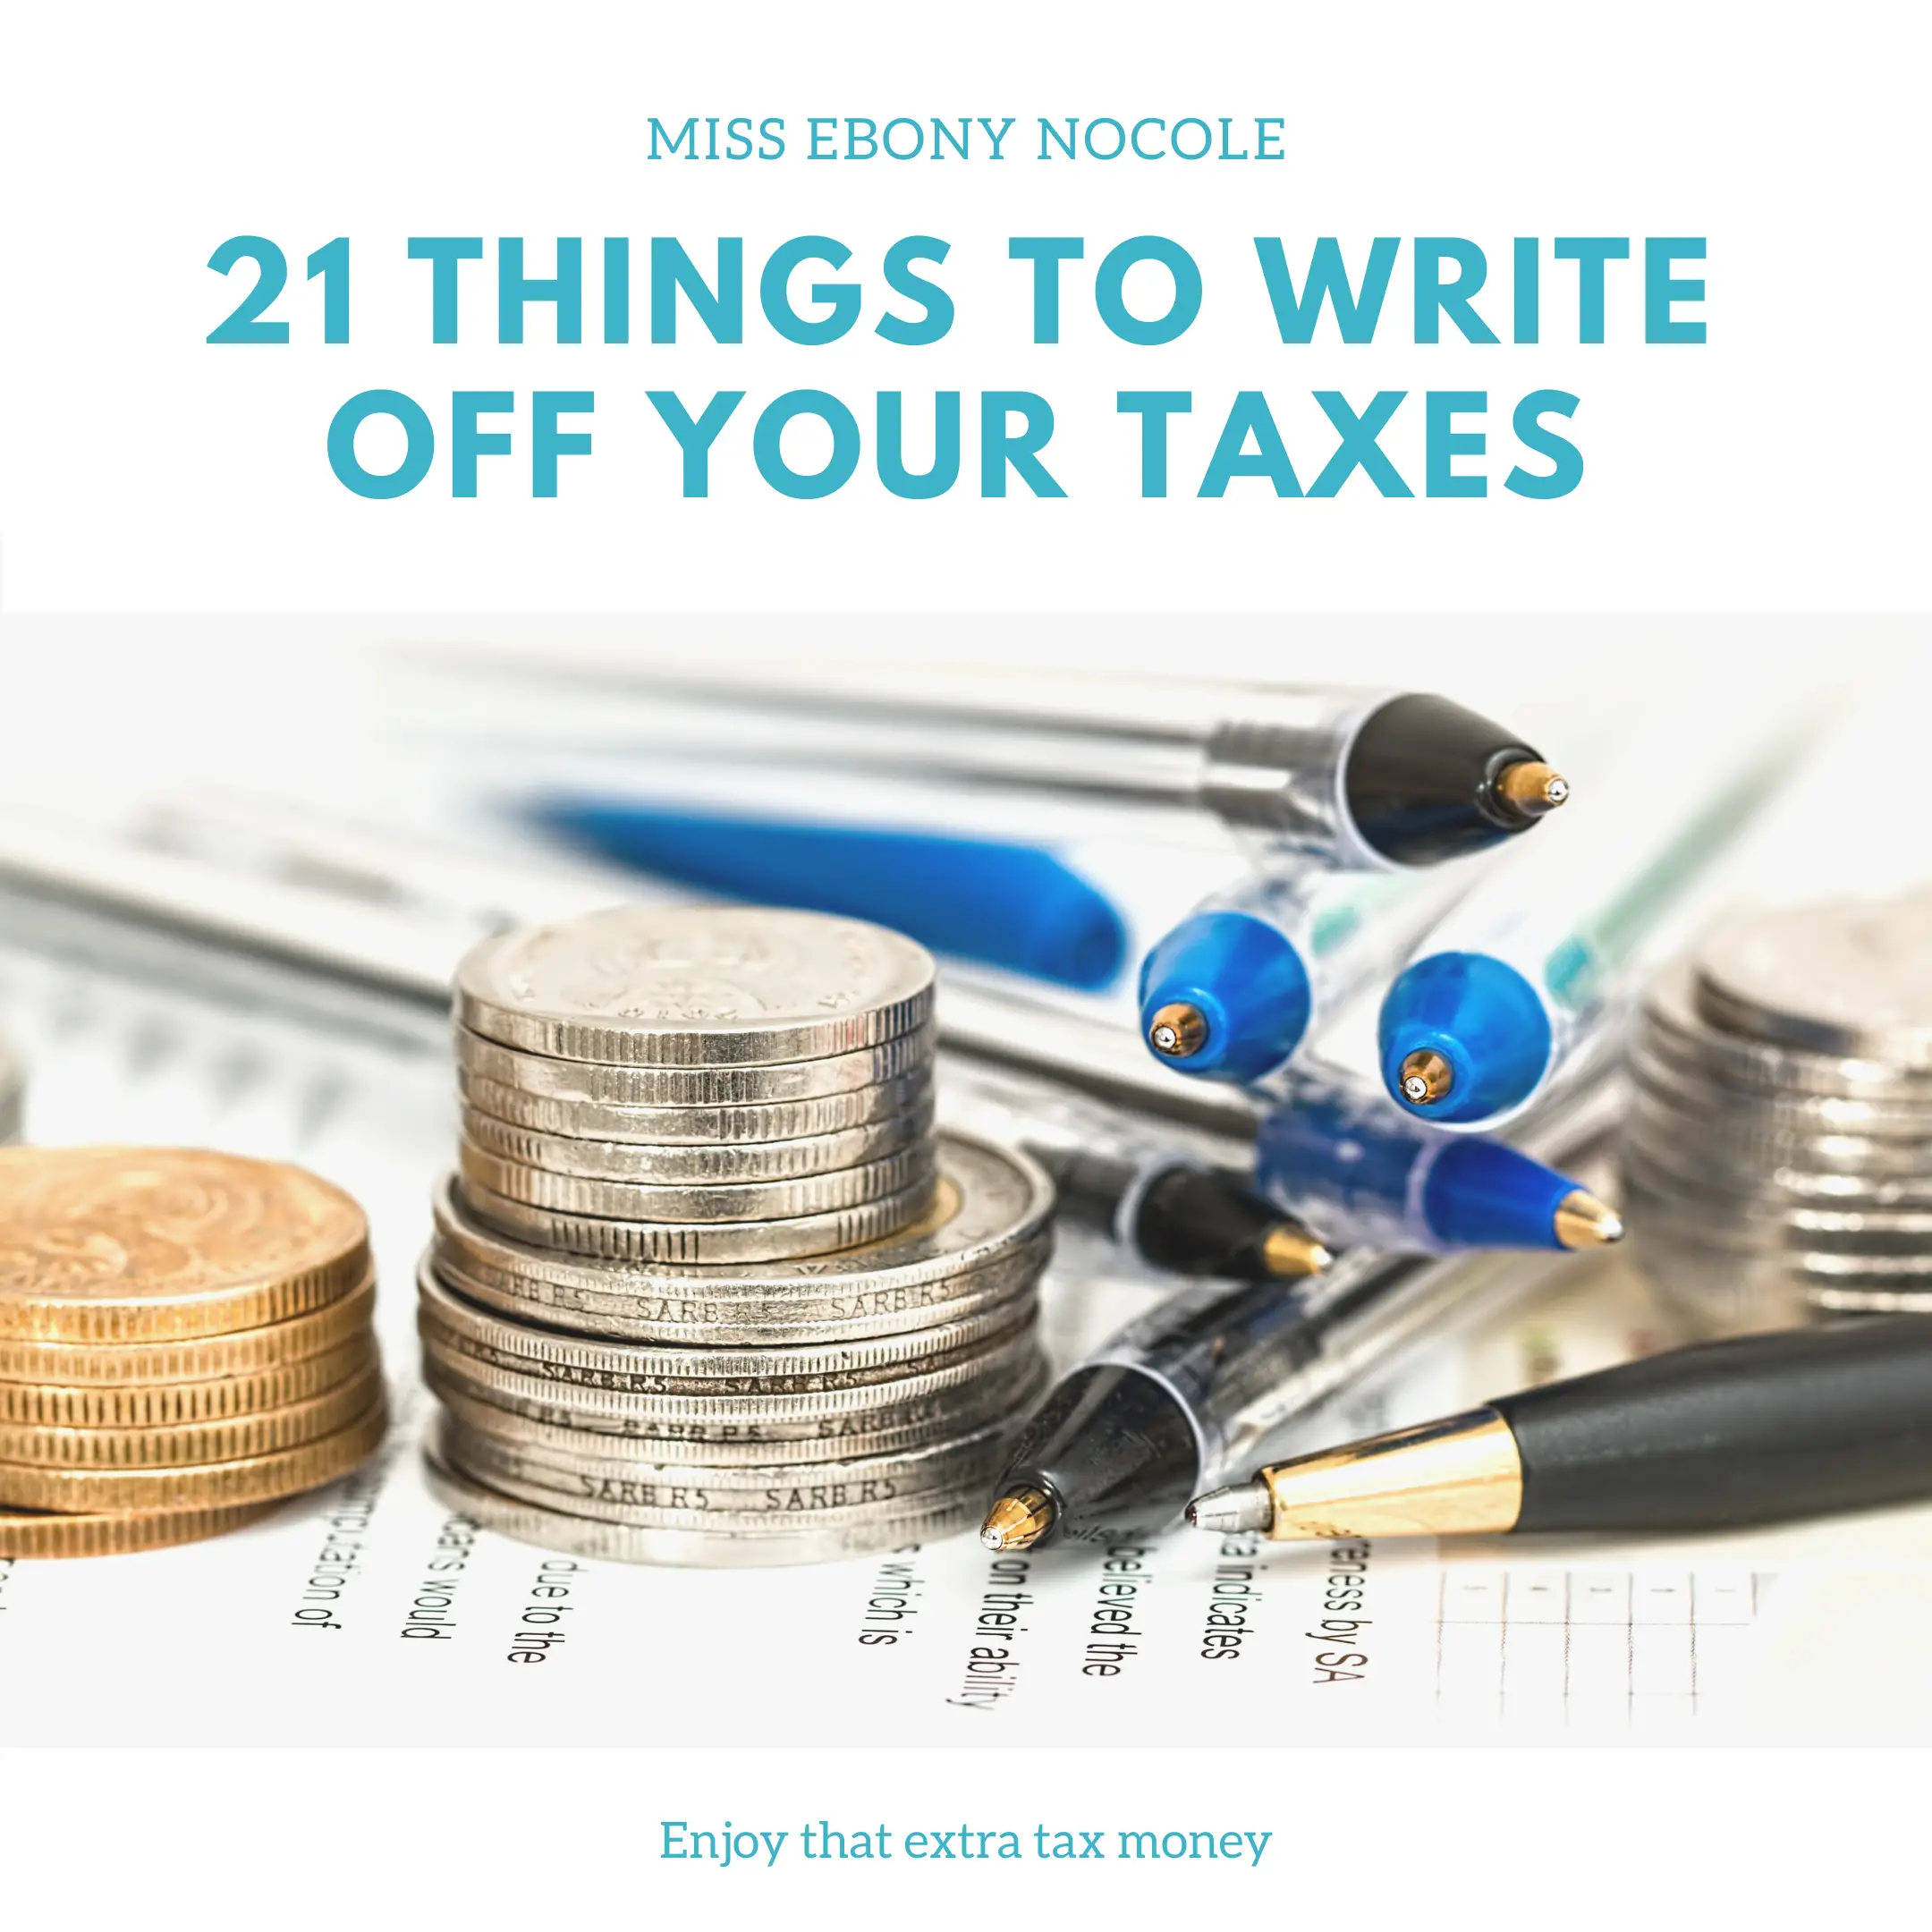 21 Things to write off on your taxes